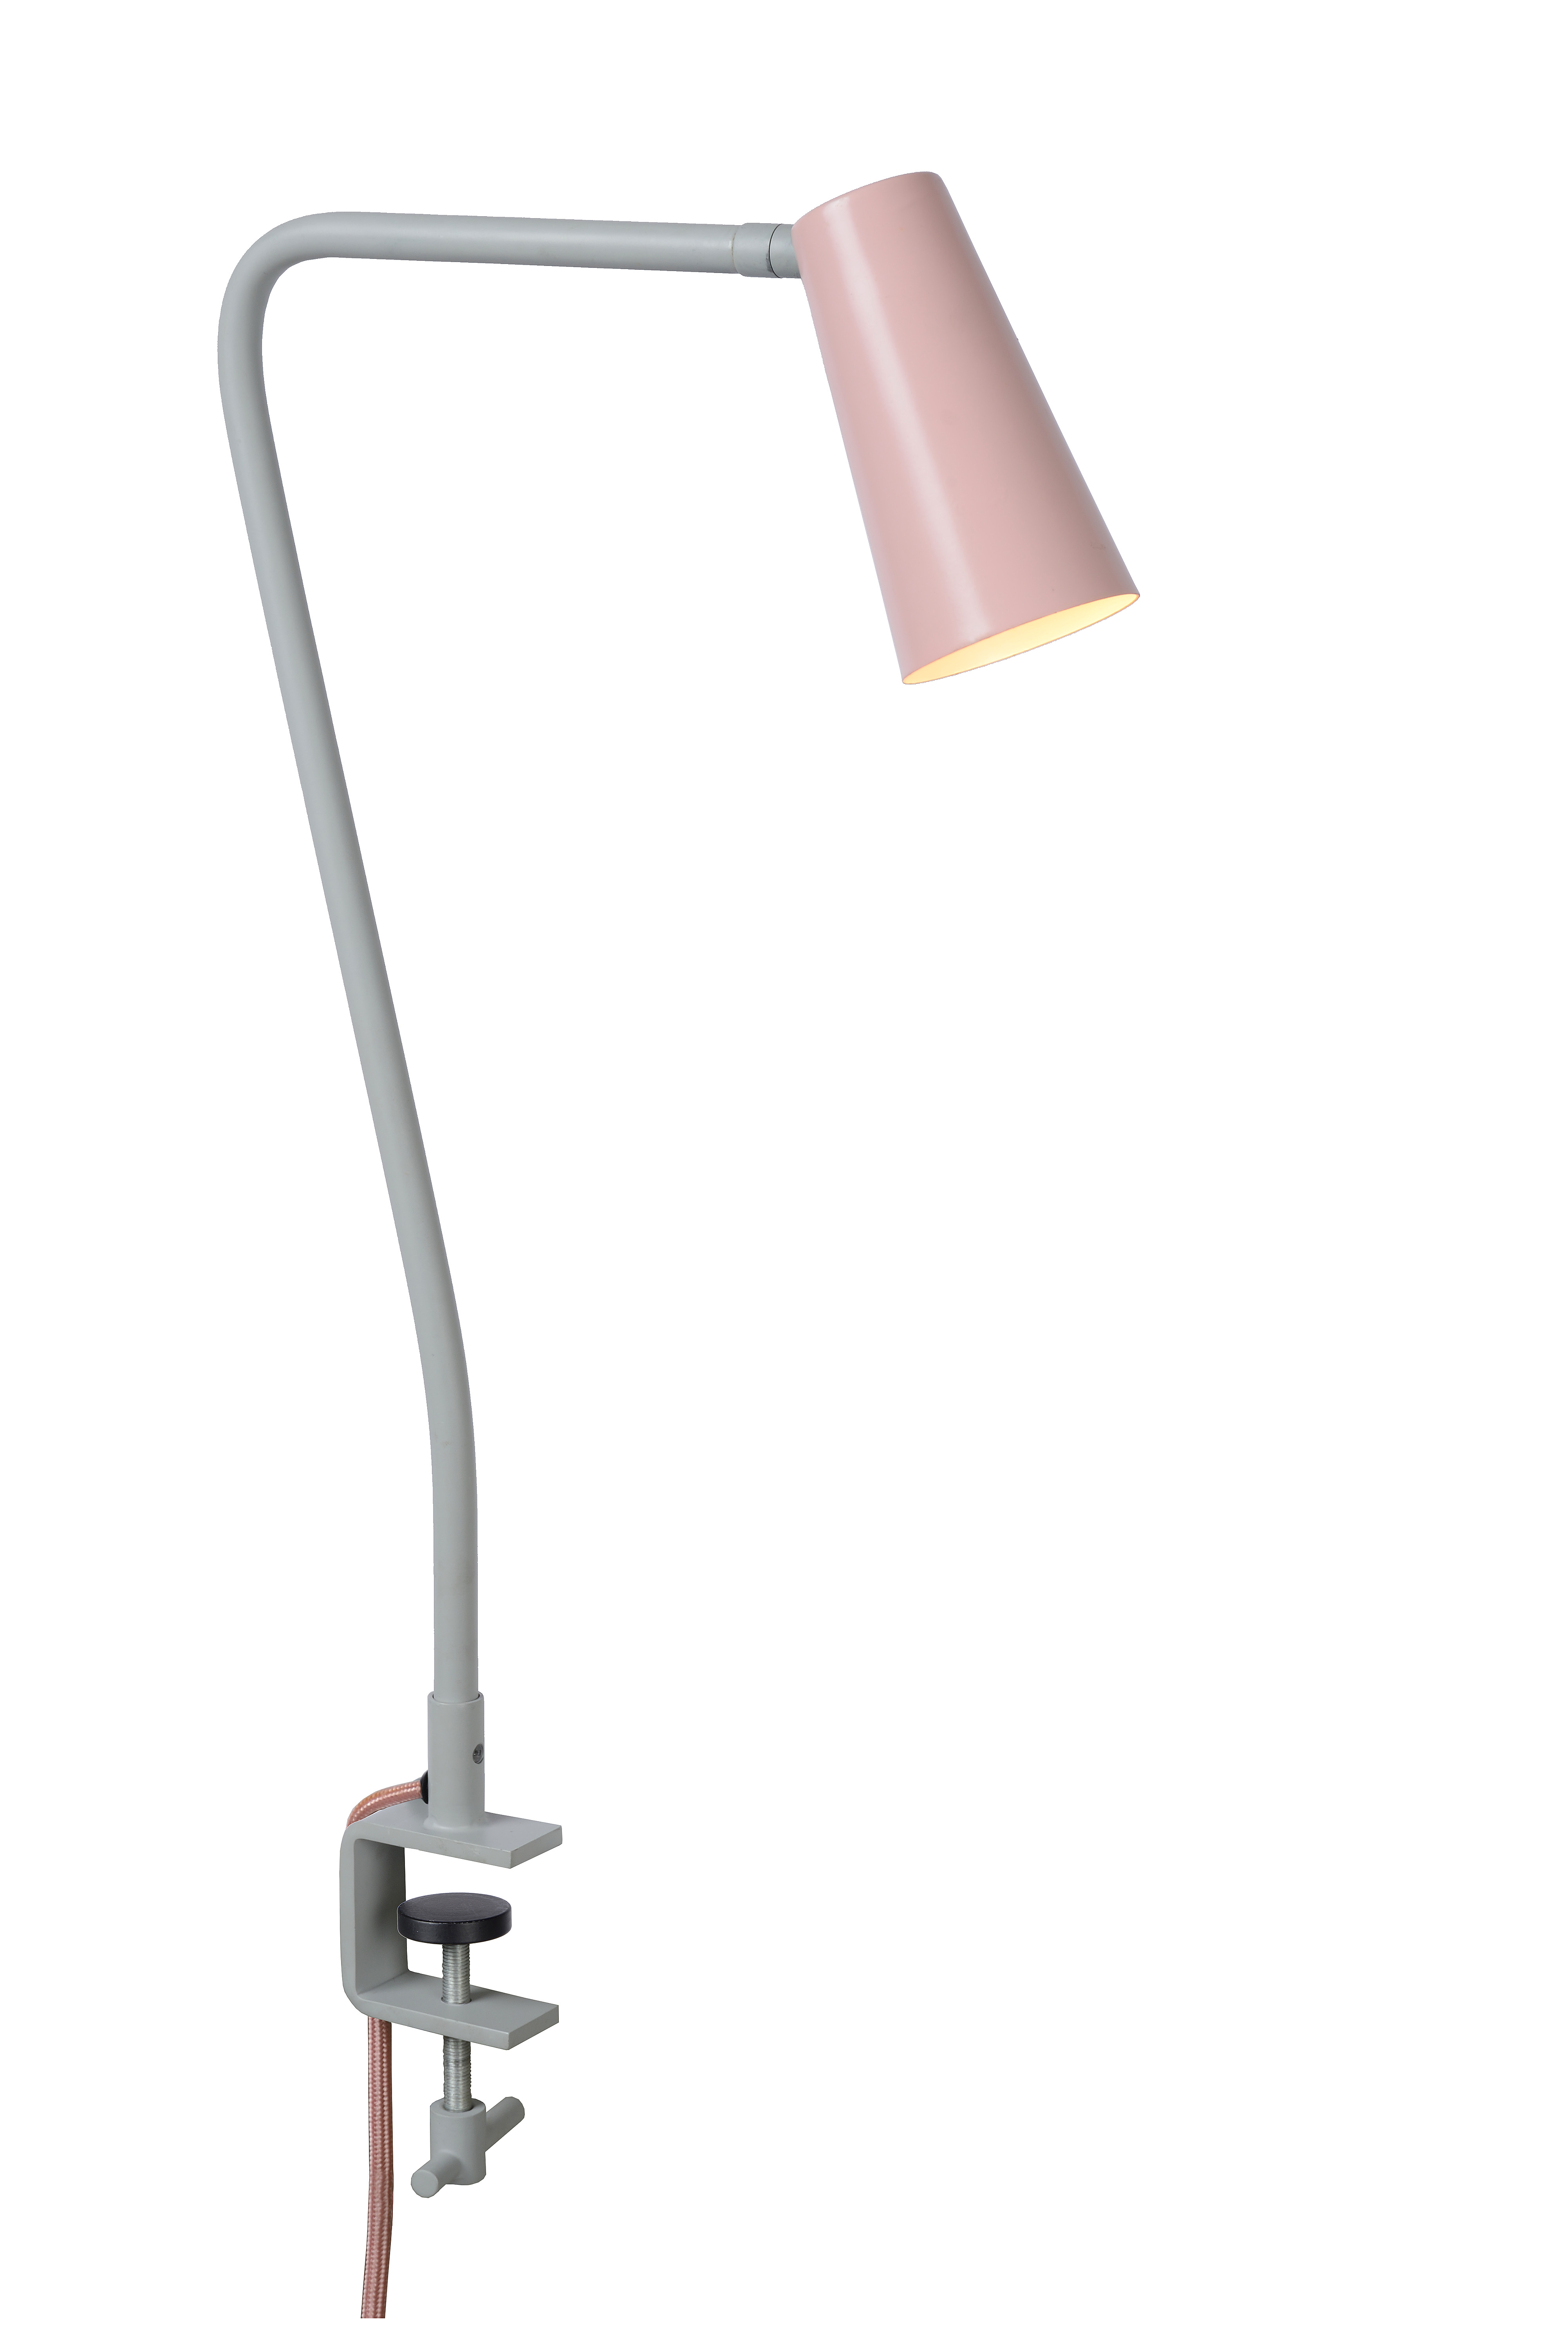 Lucide DRISS - Clamp lamps Children - 1xGU10 - Pink